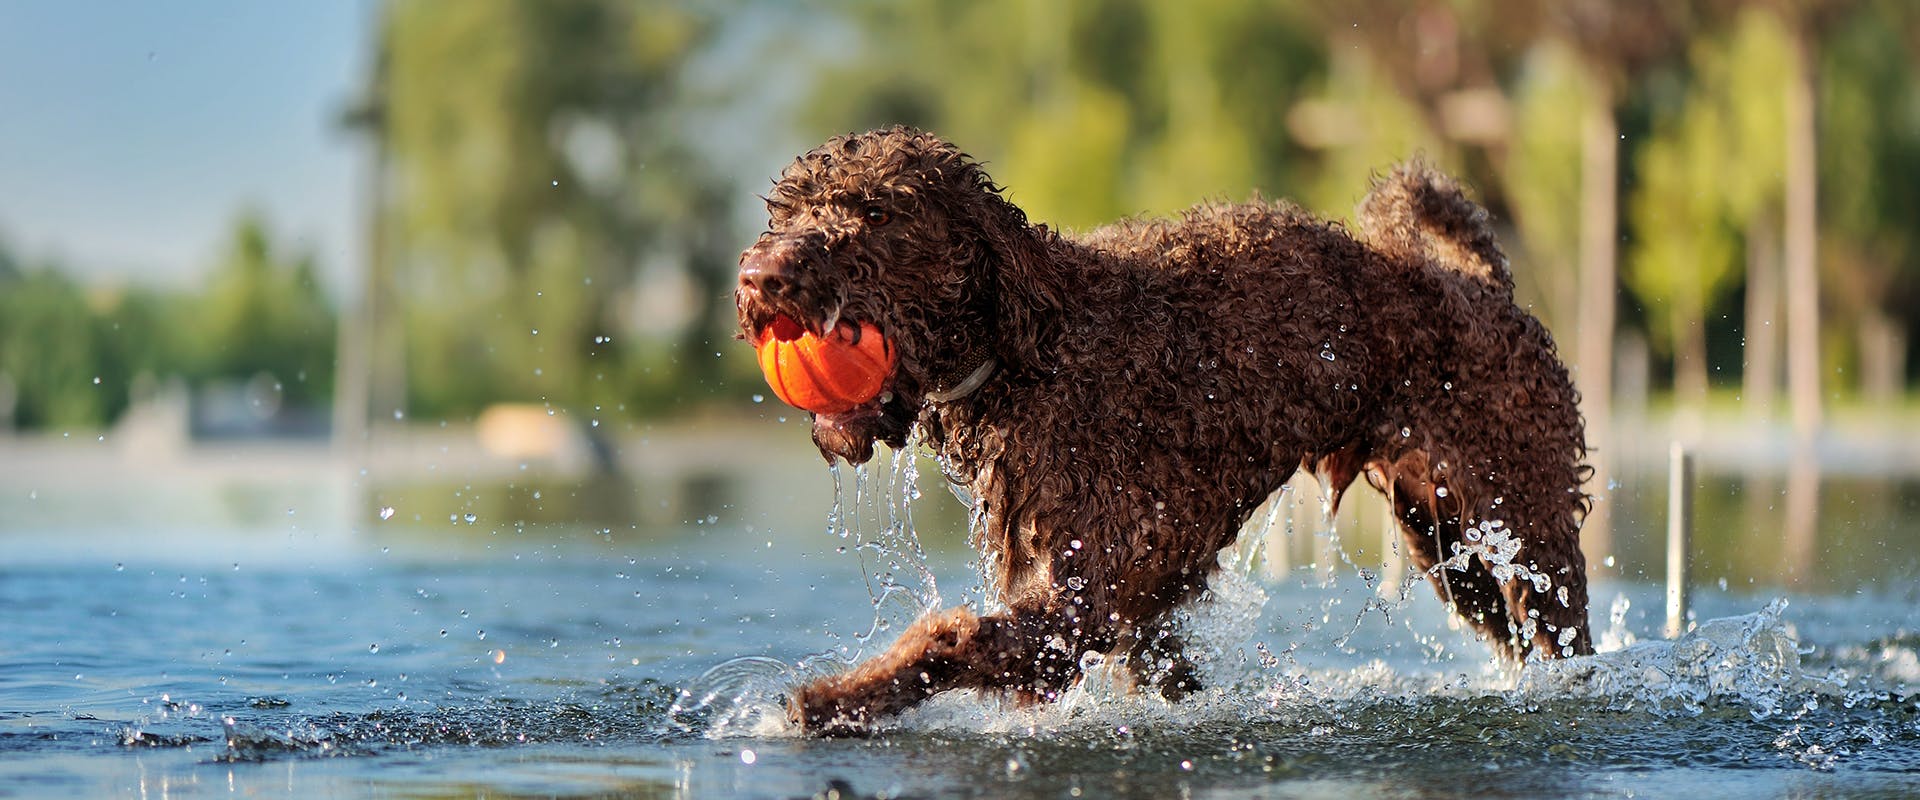 A dog with a ball in its mouth walking through a lake